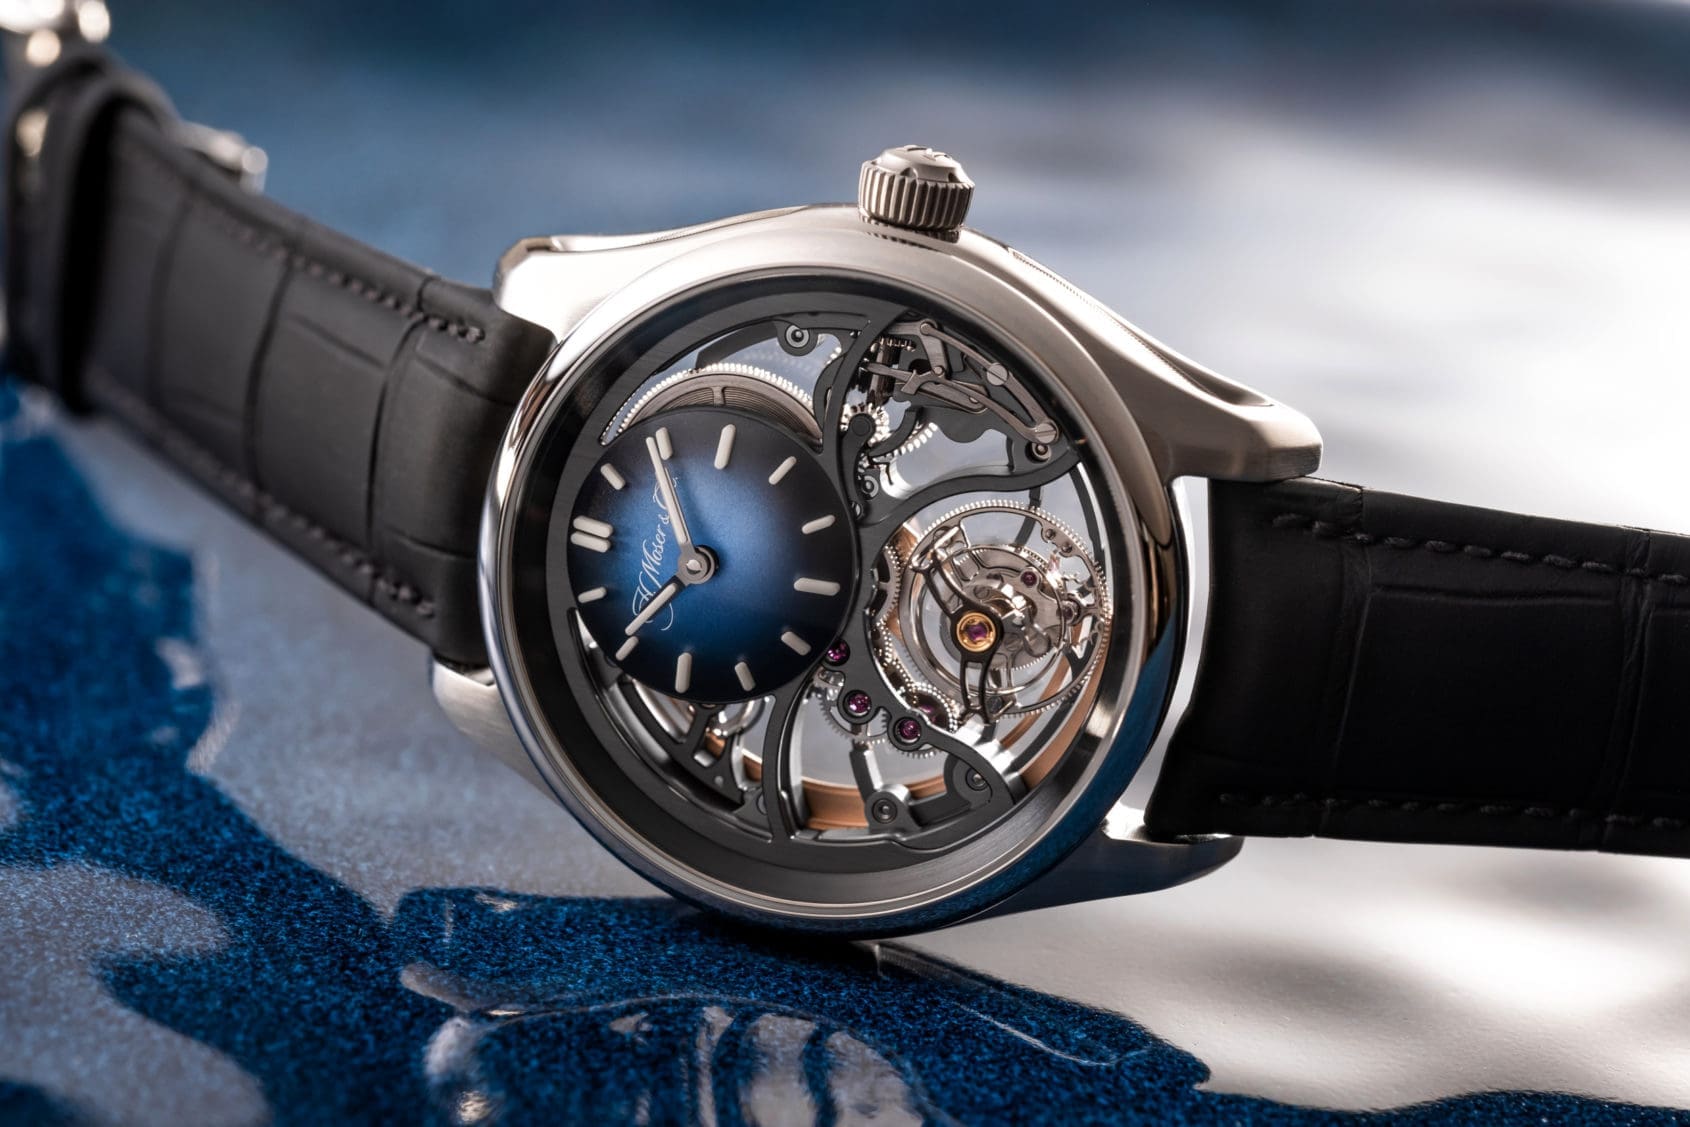 WATCHES & WONDERS: The H. Moser & Cie. Pioneer Cylindrical Tourbillon Skeleton